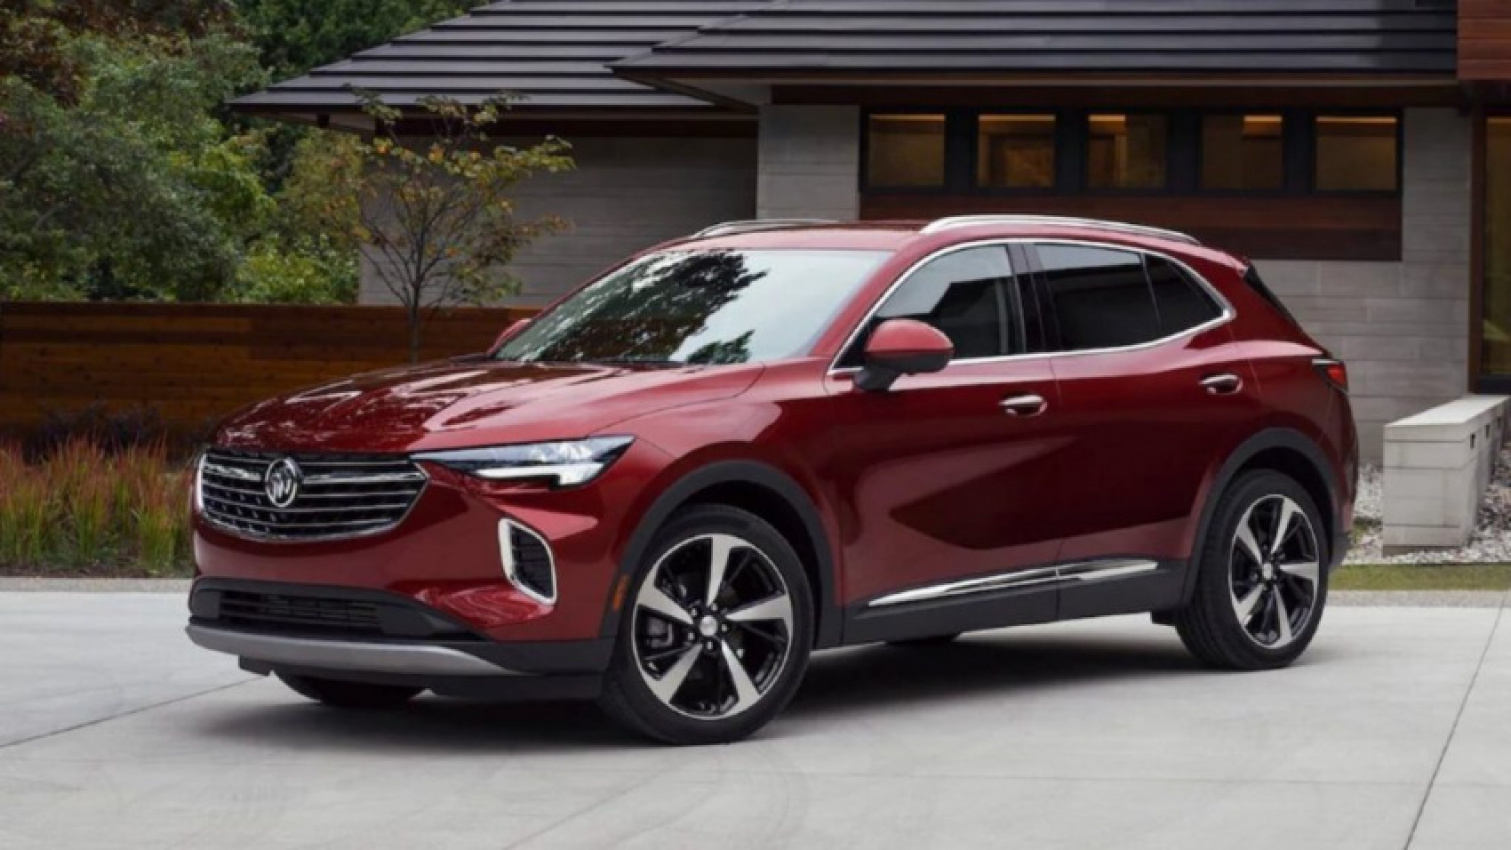 autos, cars, audi, buick, cadillac, luxury suv, what are the 10 best luxury suv models to buy now according to consumer reports